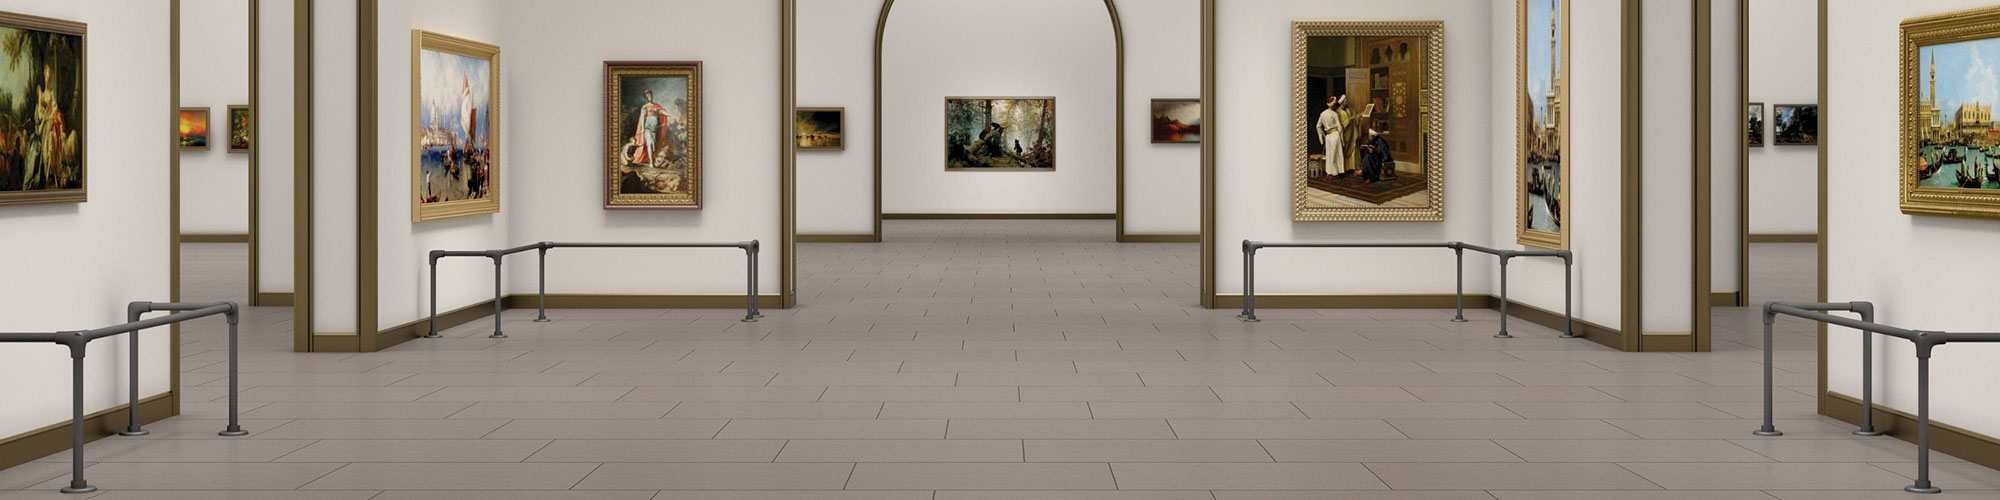 Art gallery with towering ceiling, arched doorways, gray floor tile that looks like concrete, and paintings hanging on the walls protected by railings.